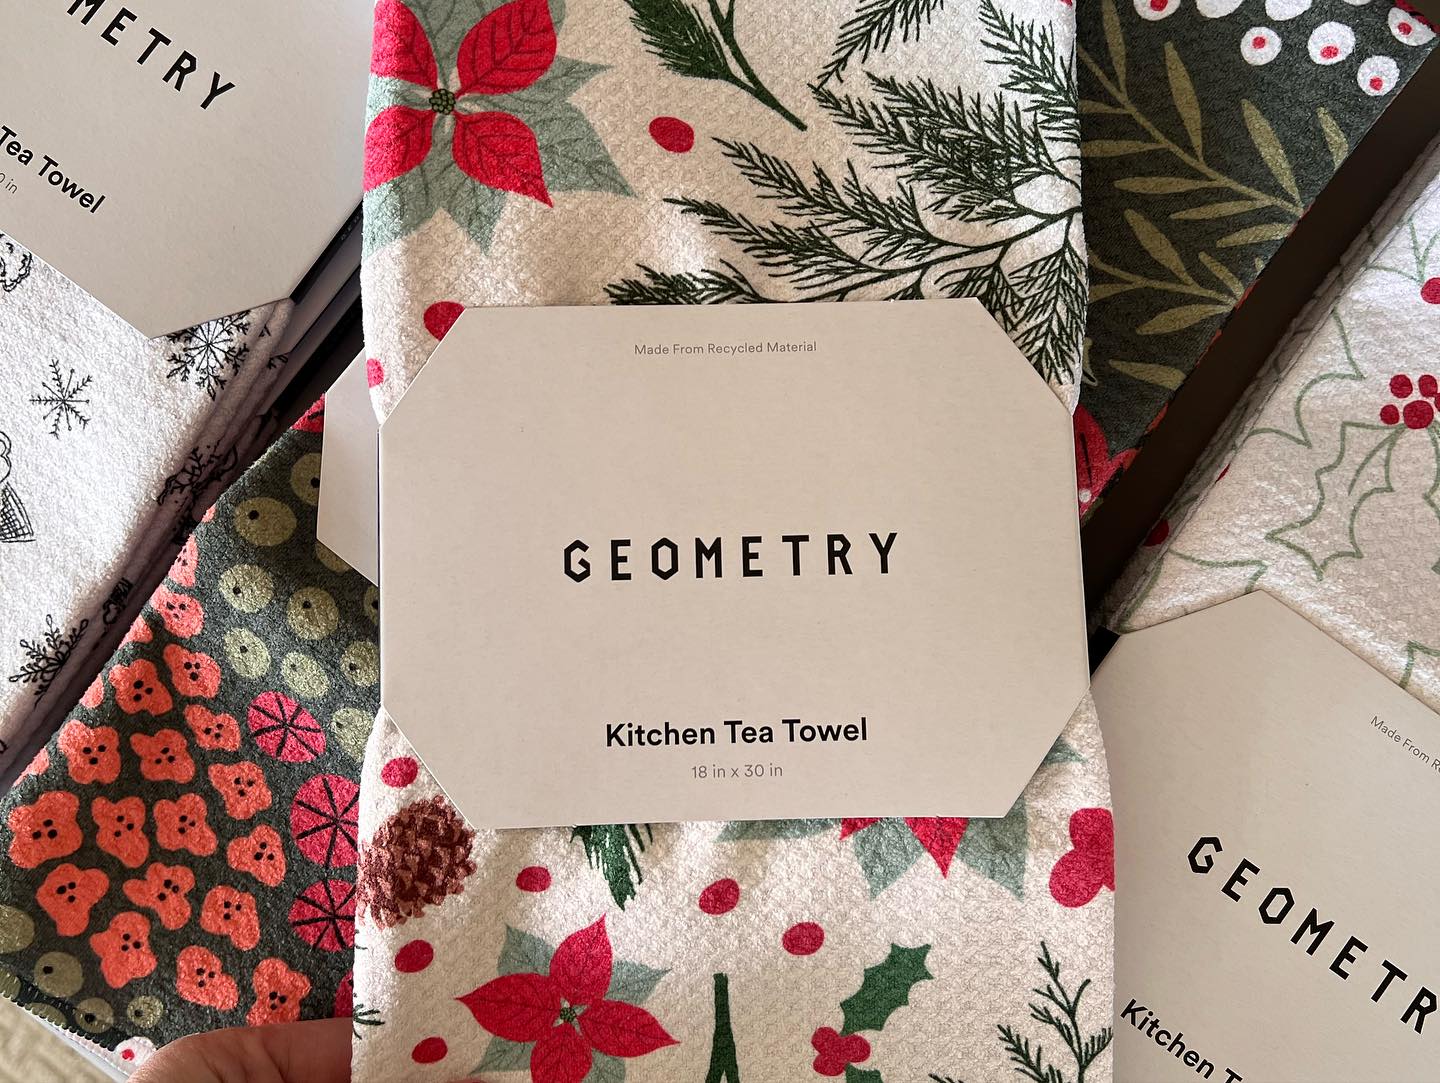 The LOVED & hard-to-keep-in-stock Geometry towels/dish cloths are